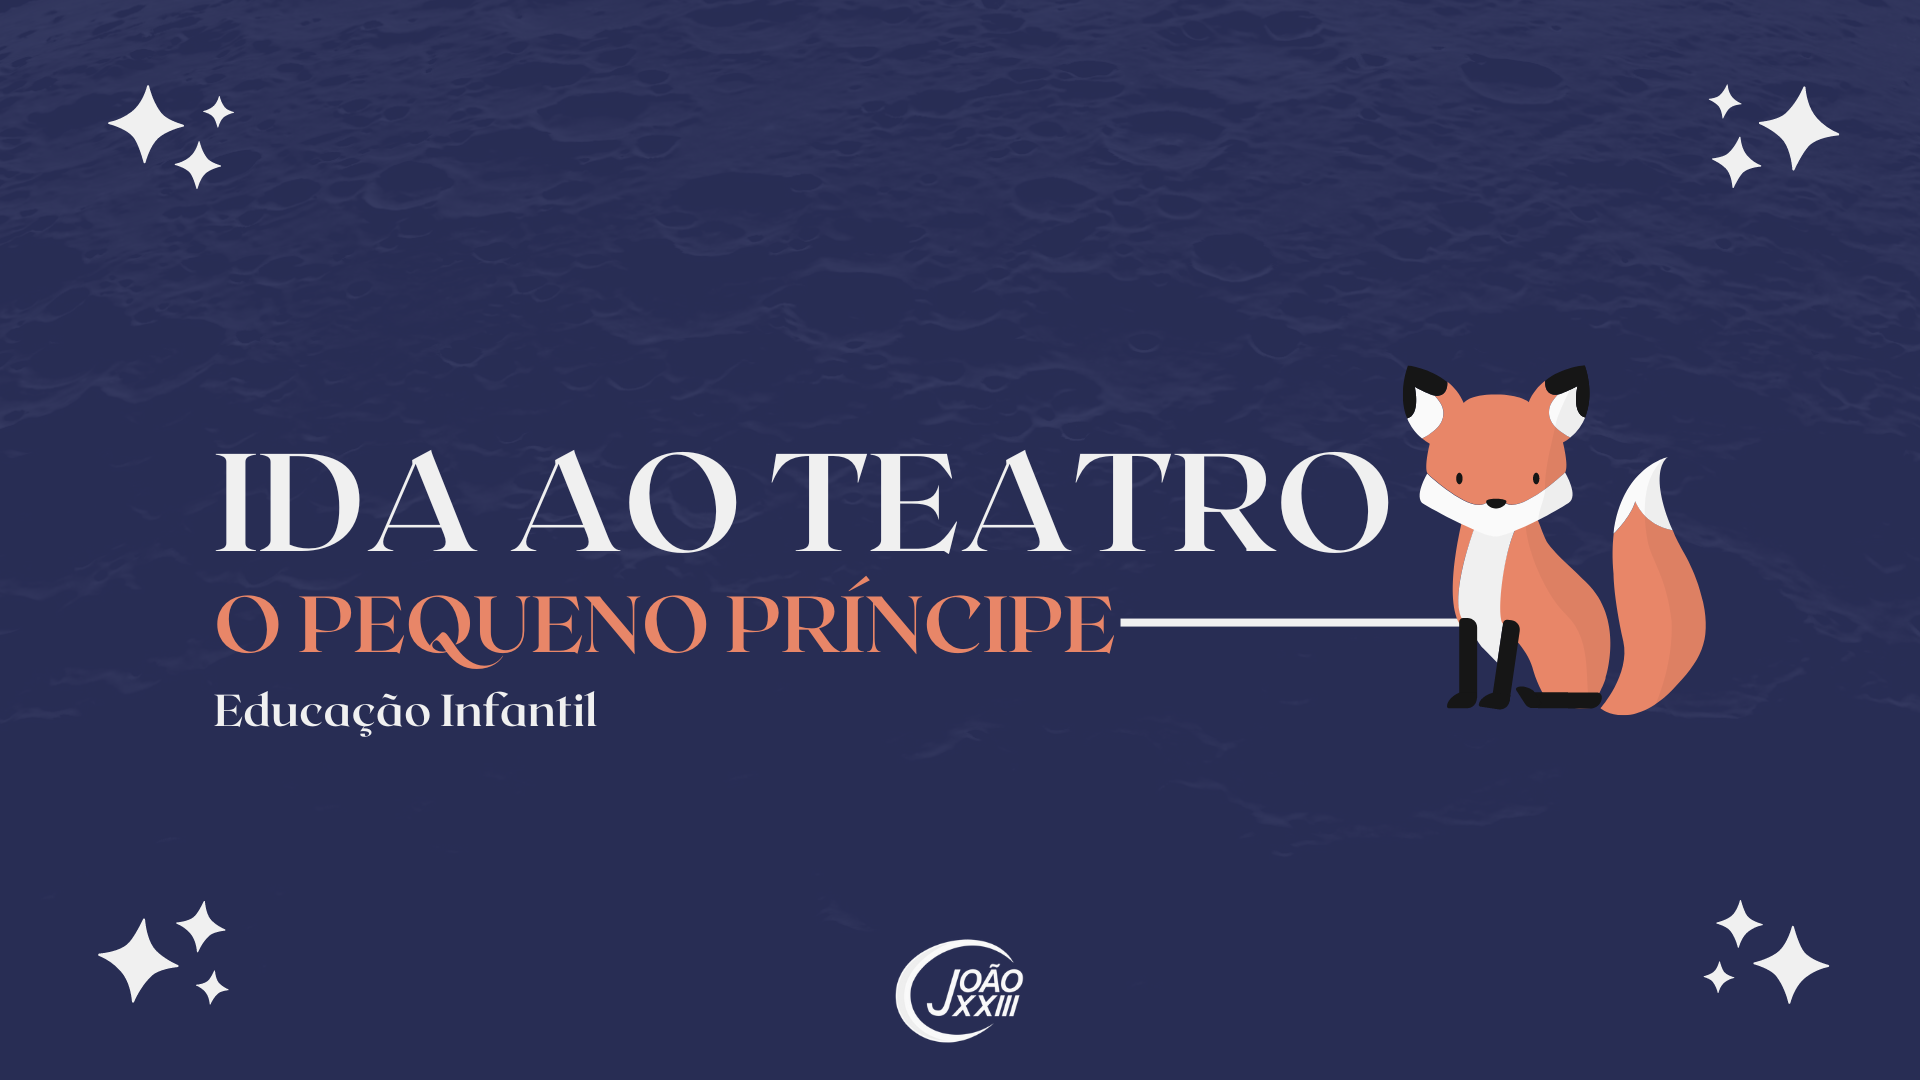 You are currently viewing Ida ao teatro